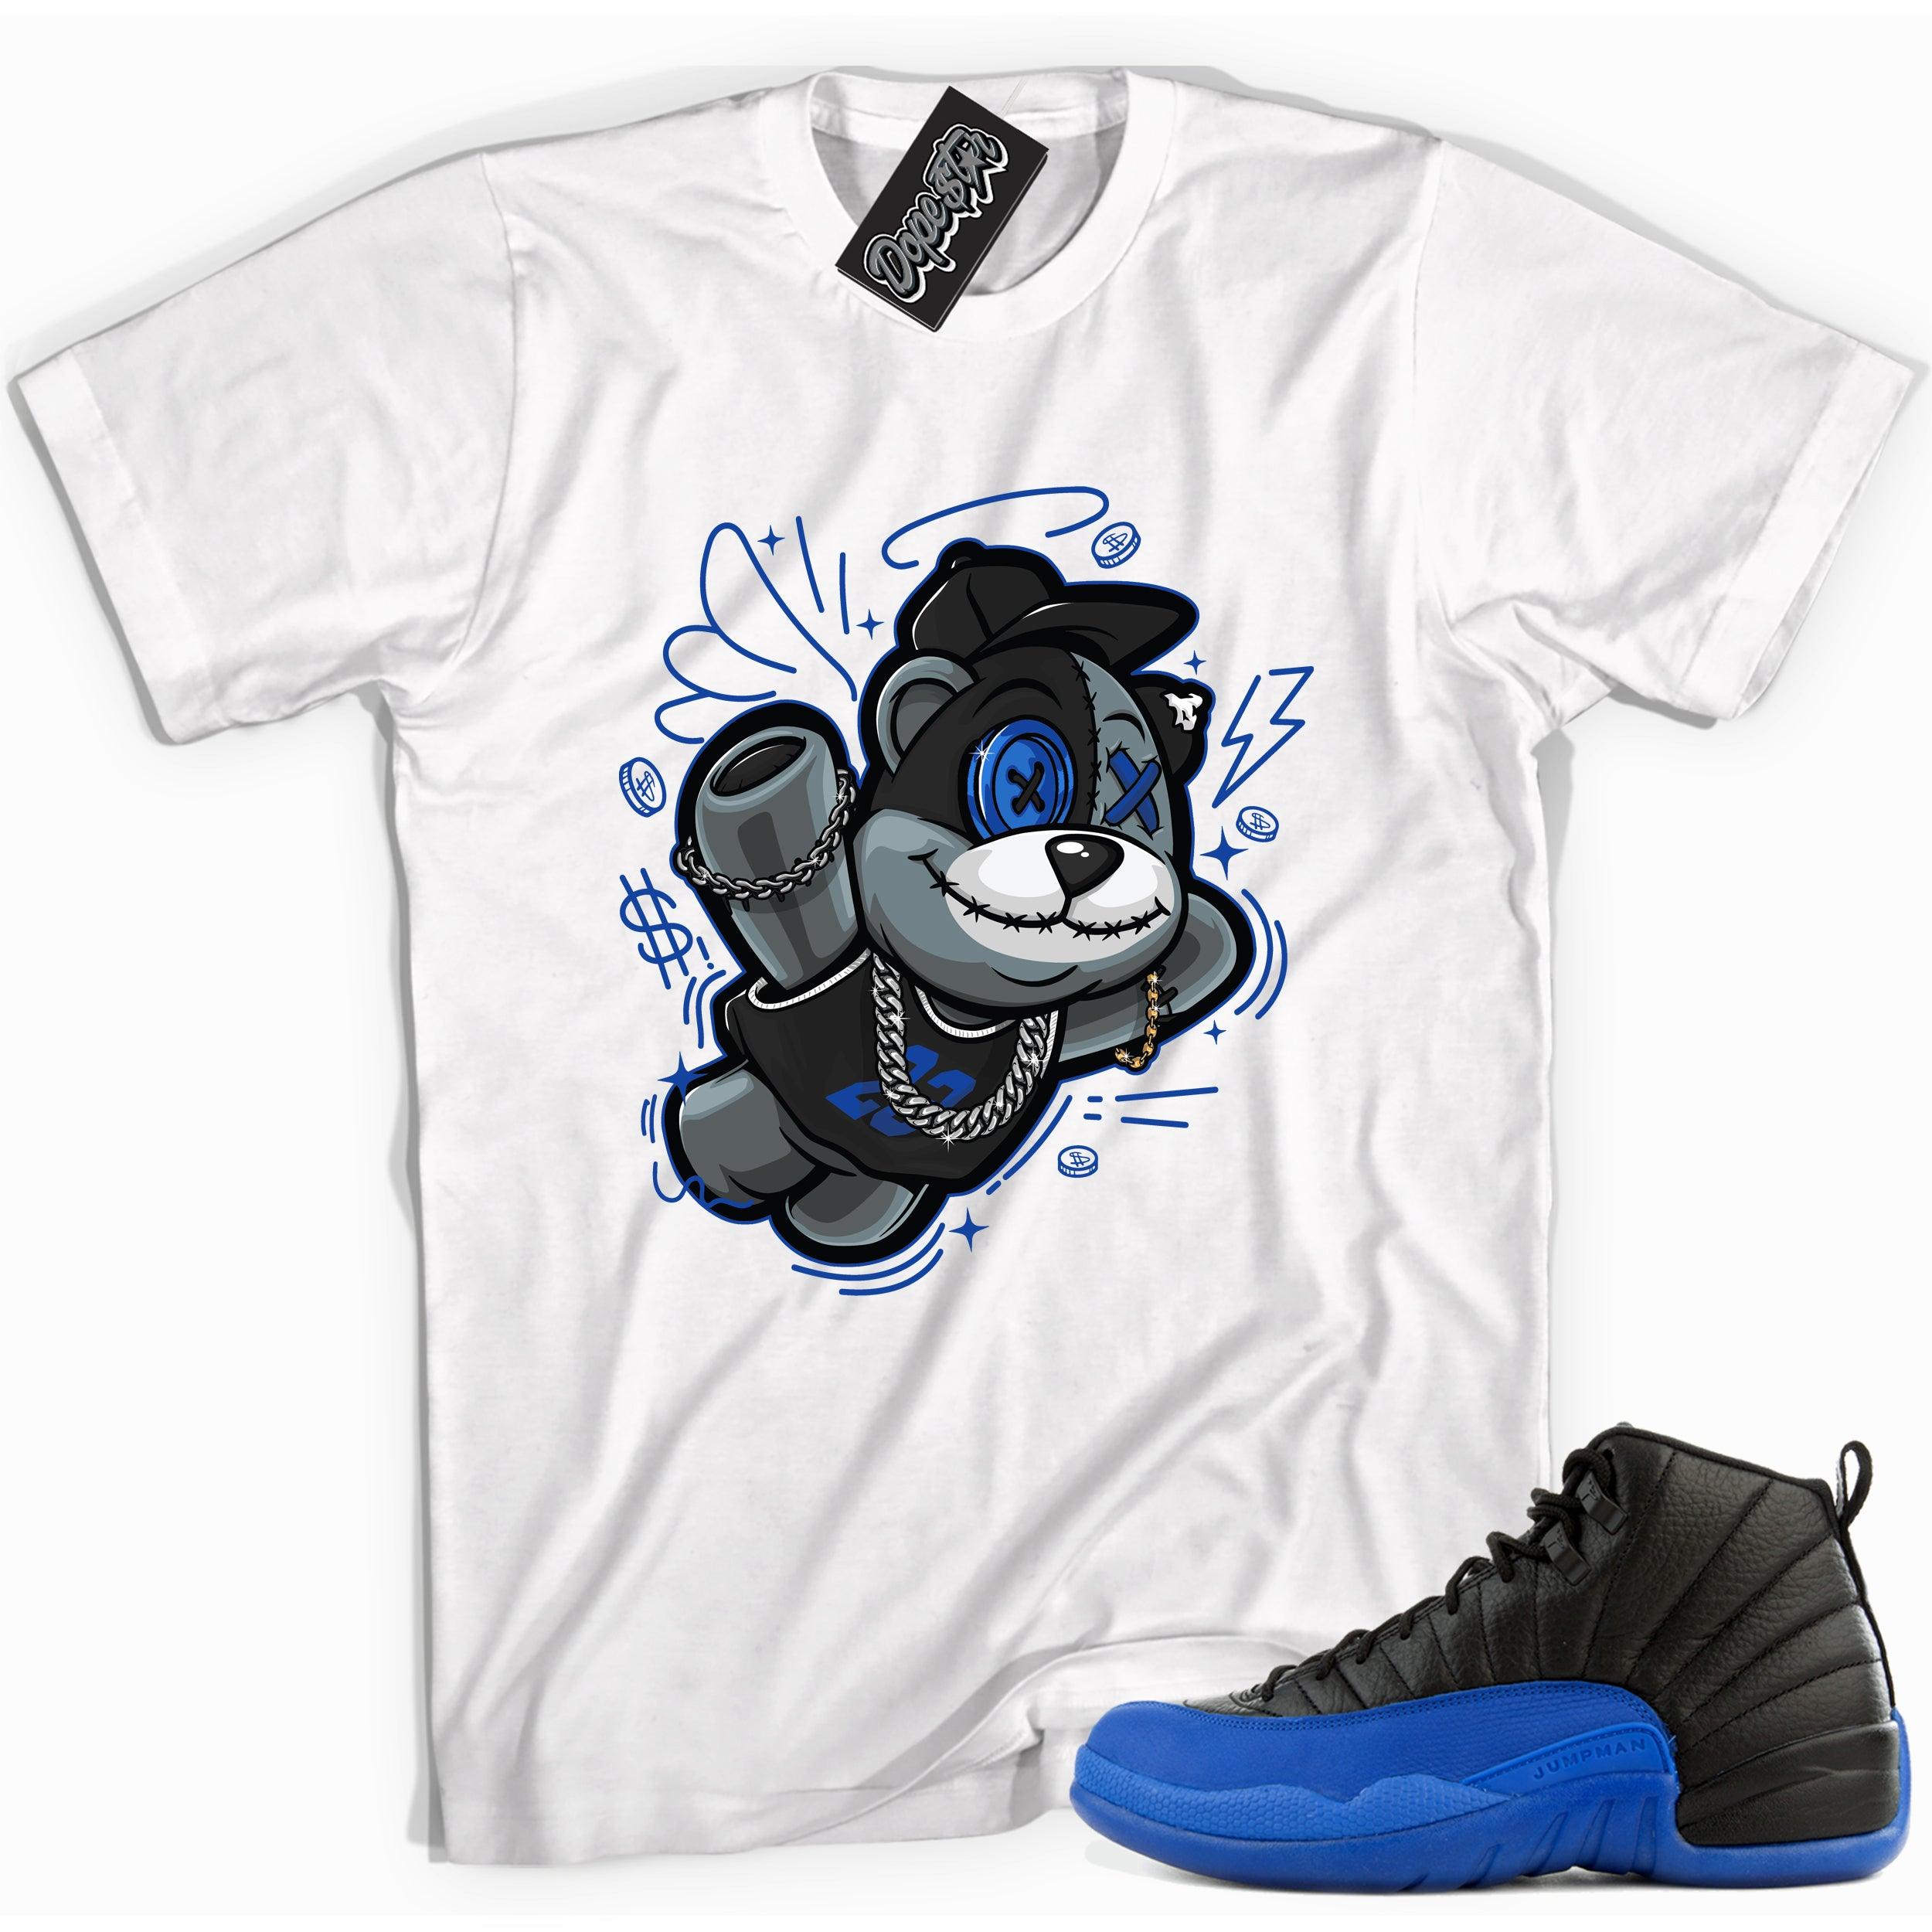 Cool white graphic tee with 'slam dunk bear' print, that perfectly matches Air Jordan 12 Retro Black Game Royal sneakers.